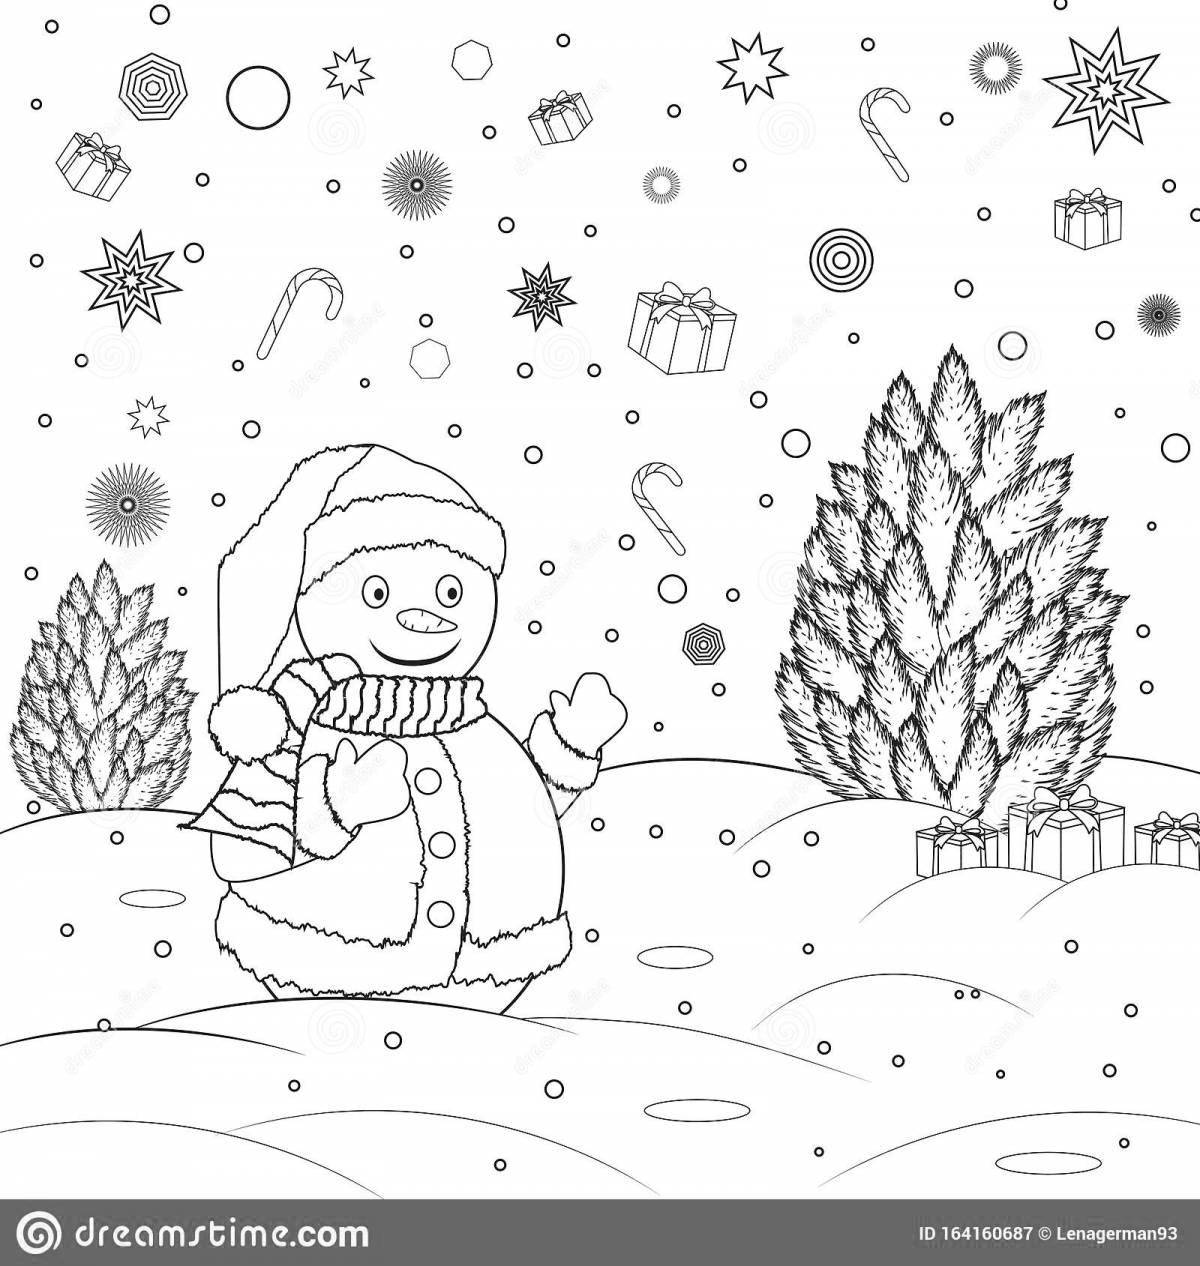 Sparkly student snowfall coloring page